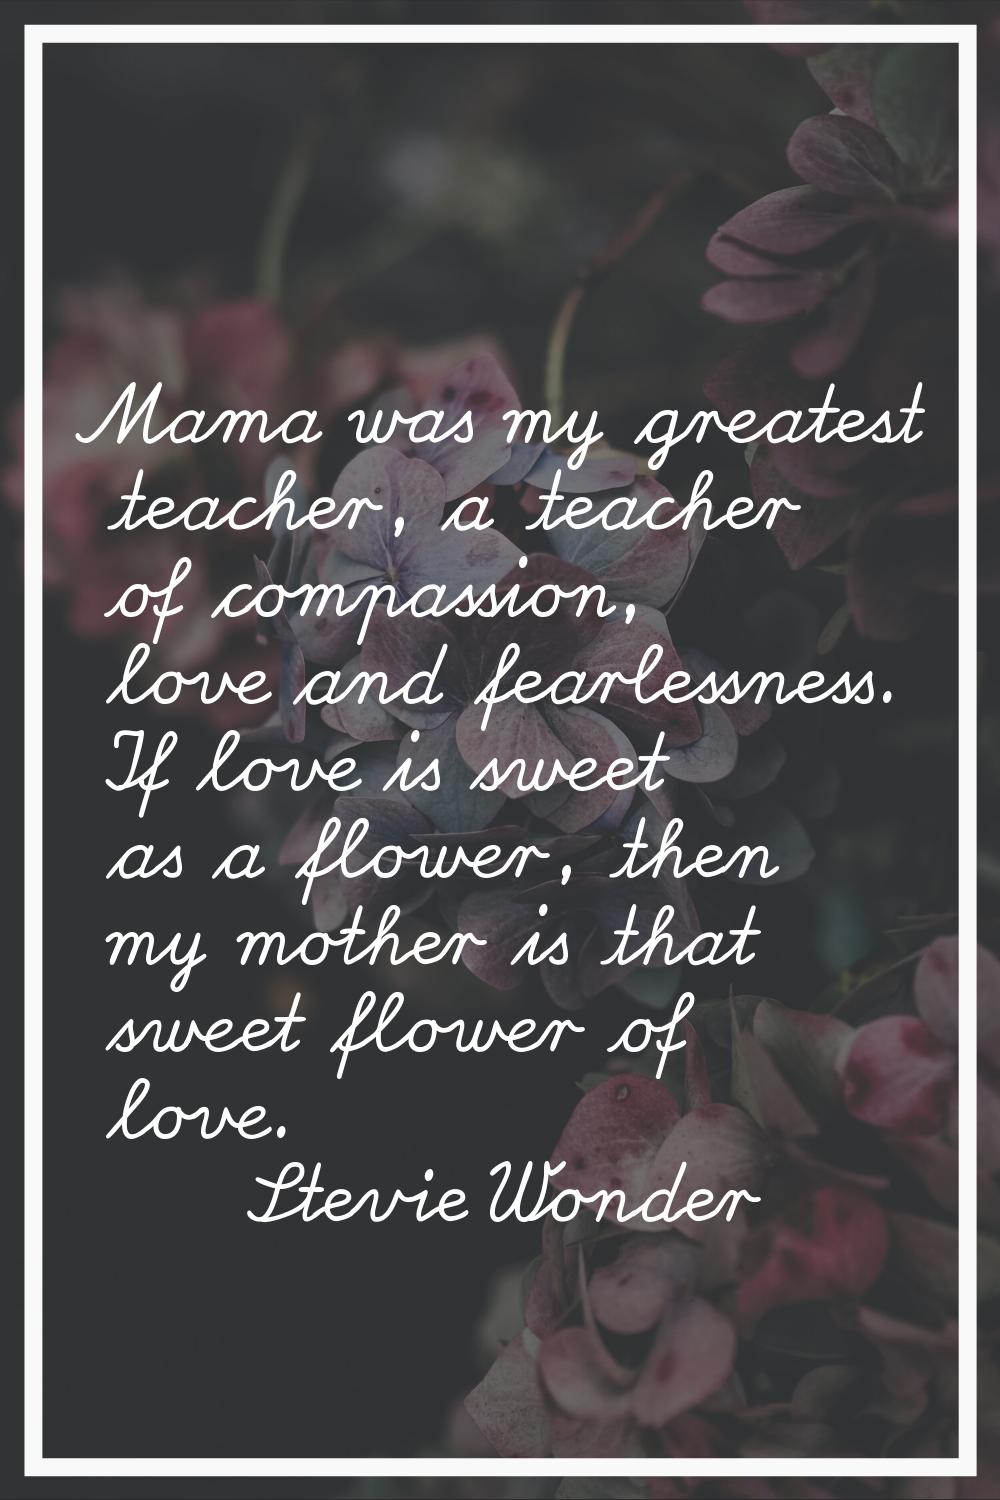 Mama was my greatest teacher, a teacher of compassion, love and fearlessness. If love is sweet as a